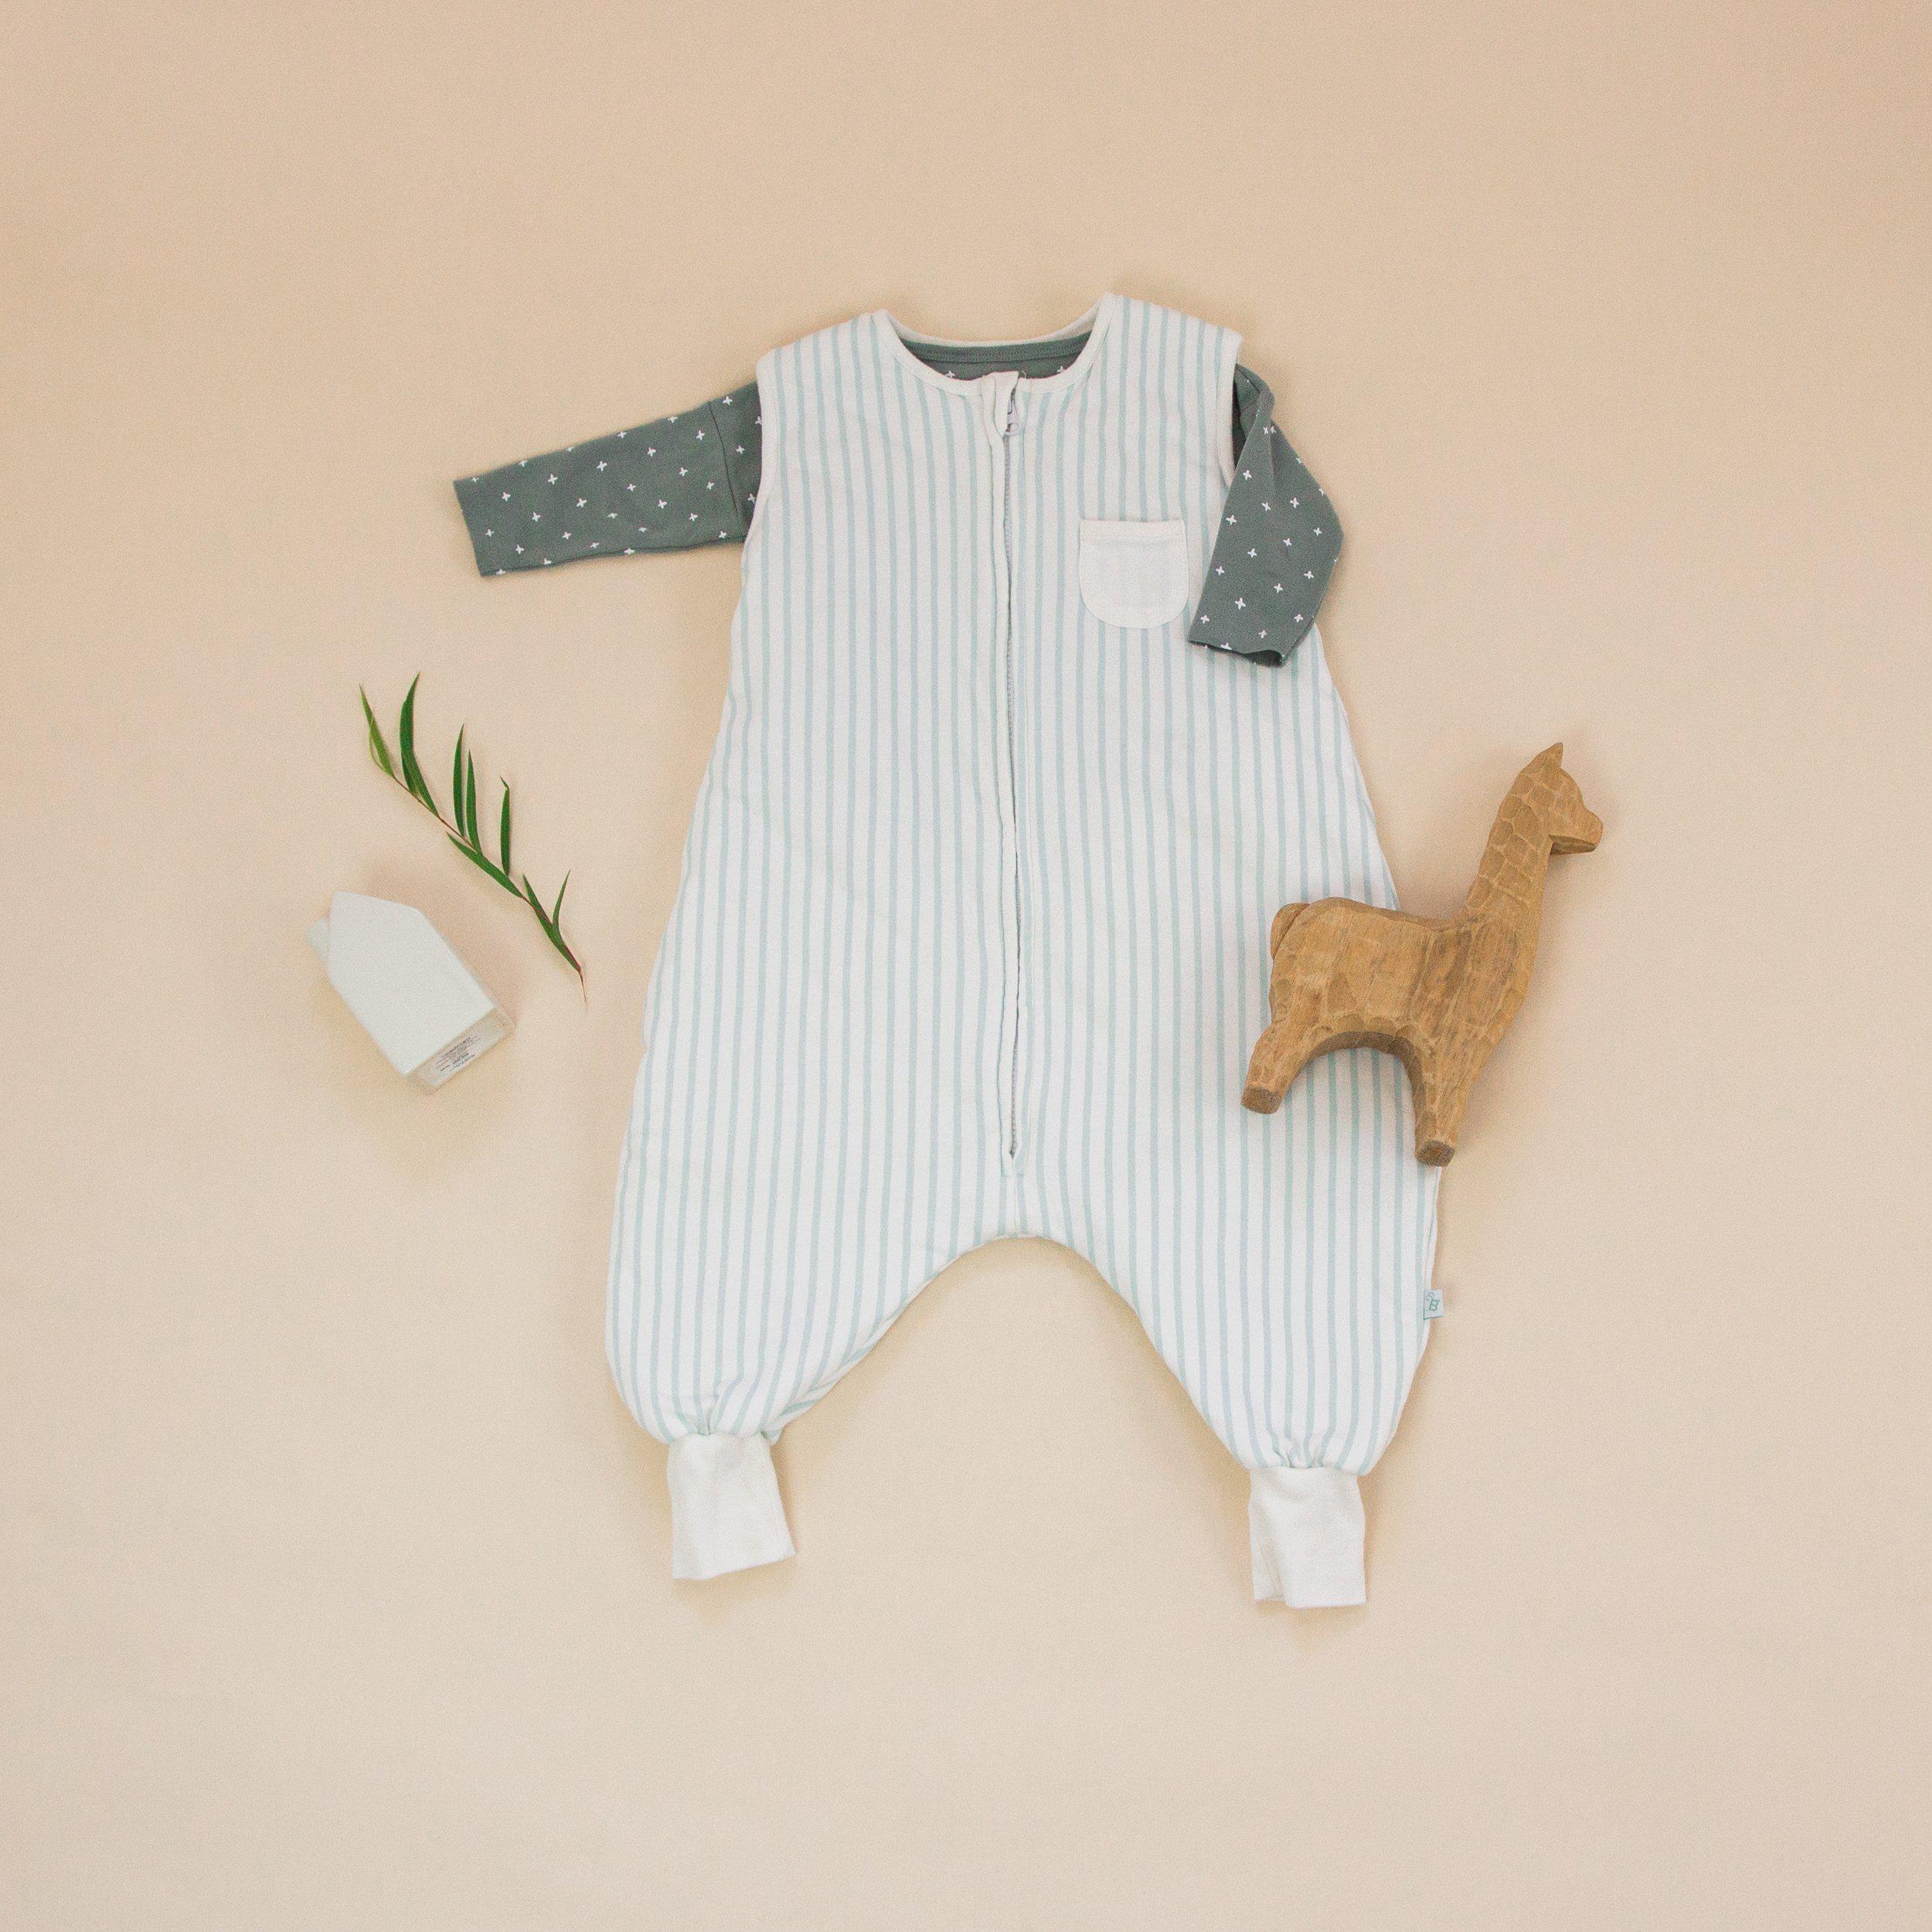 Striped Minty Green Dreamsuit - 1.5 TOG Toddler Sleep Sack With Legs - Tealbee